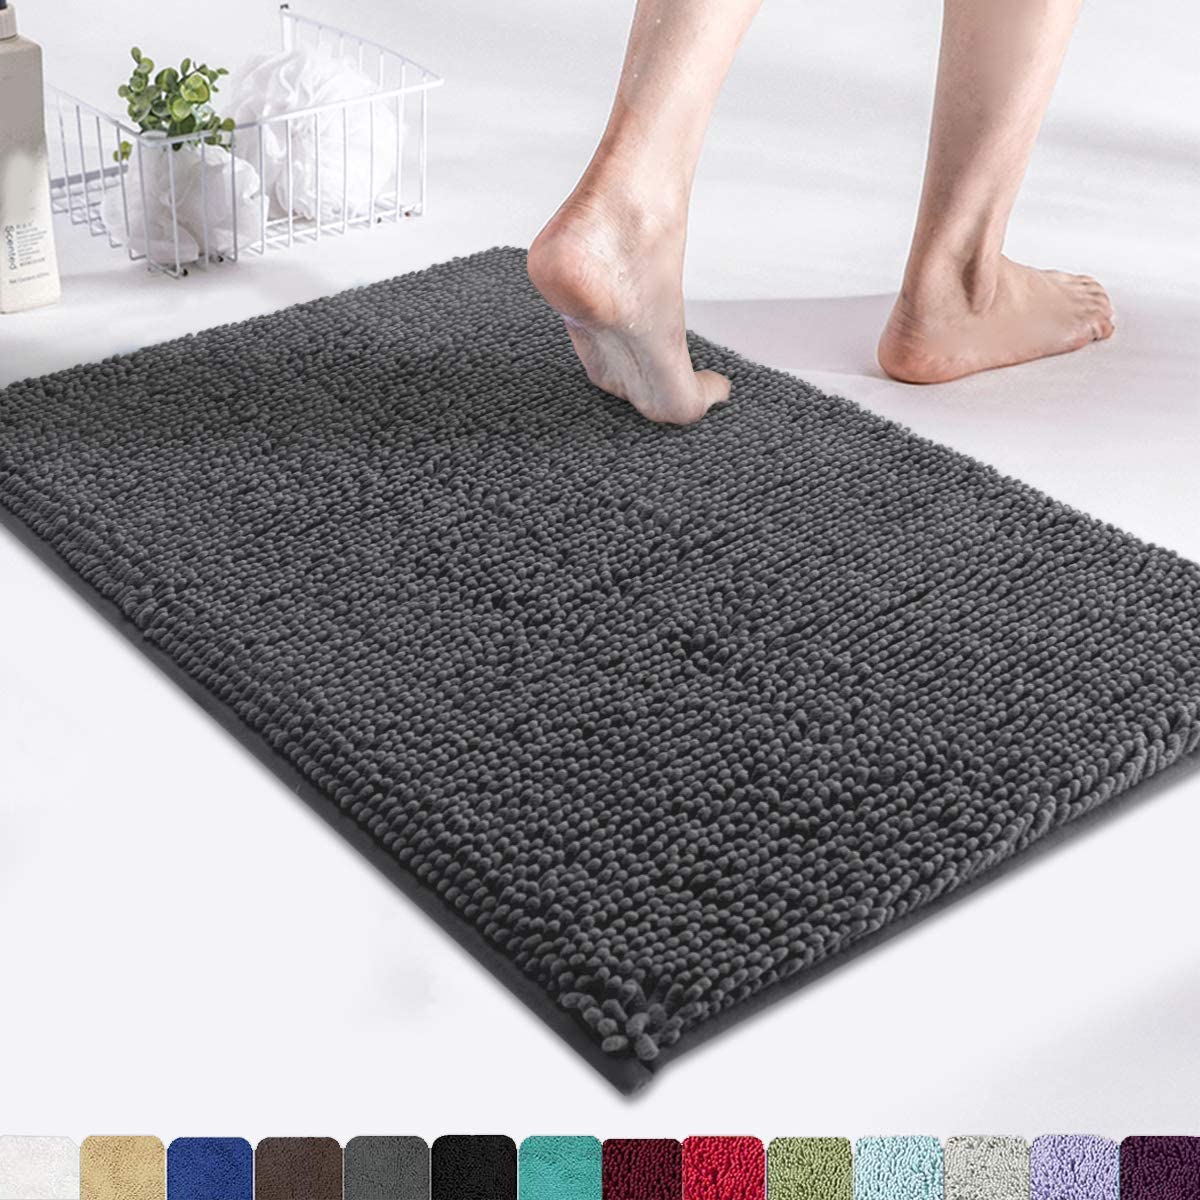 S For Bathroom Rugs Soft, Absorbent, Shaggy Microfiber,machi